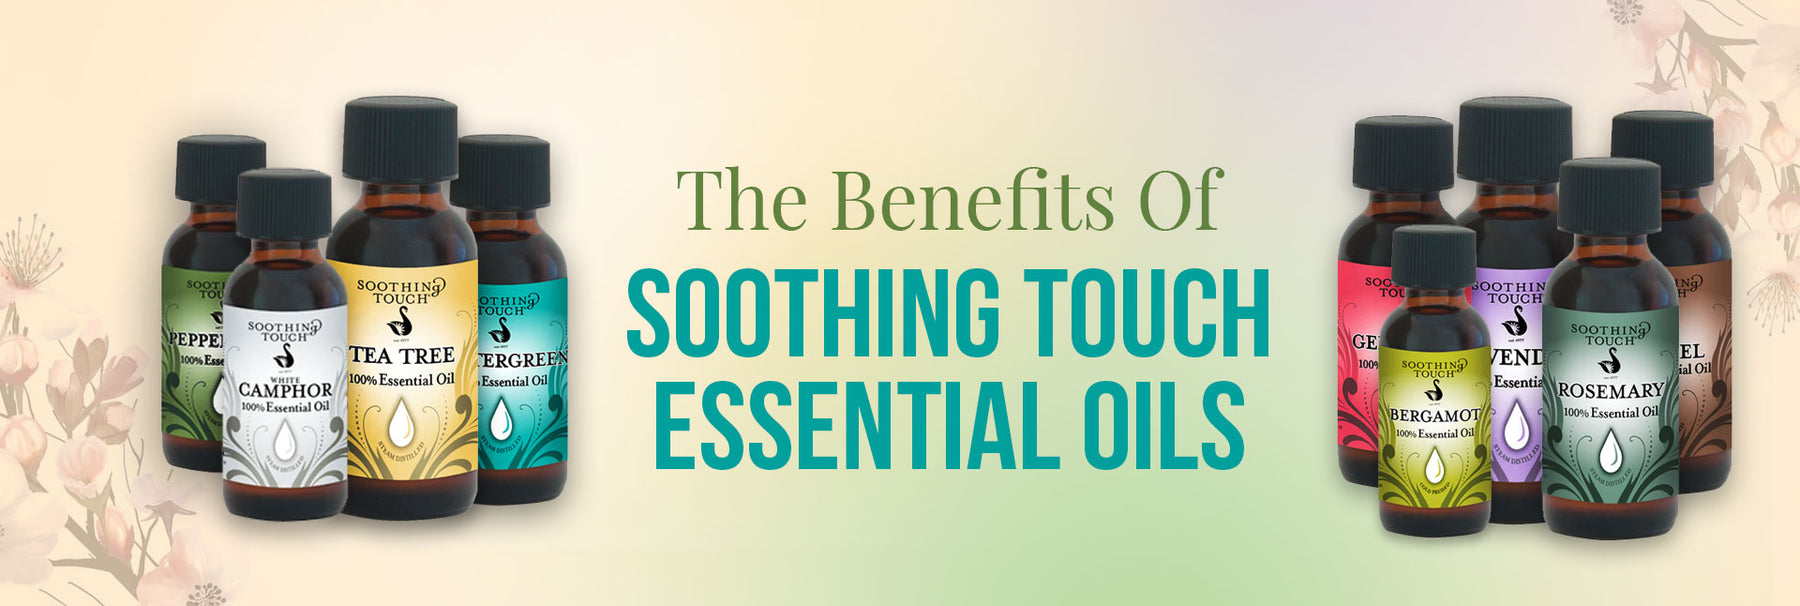 Soothing Touch Essential Oil